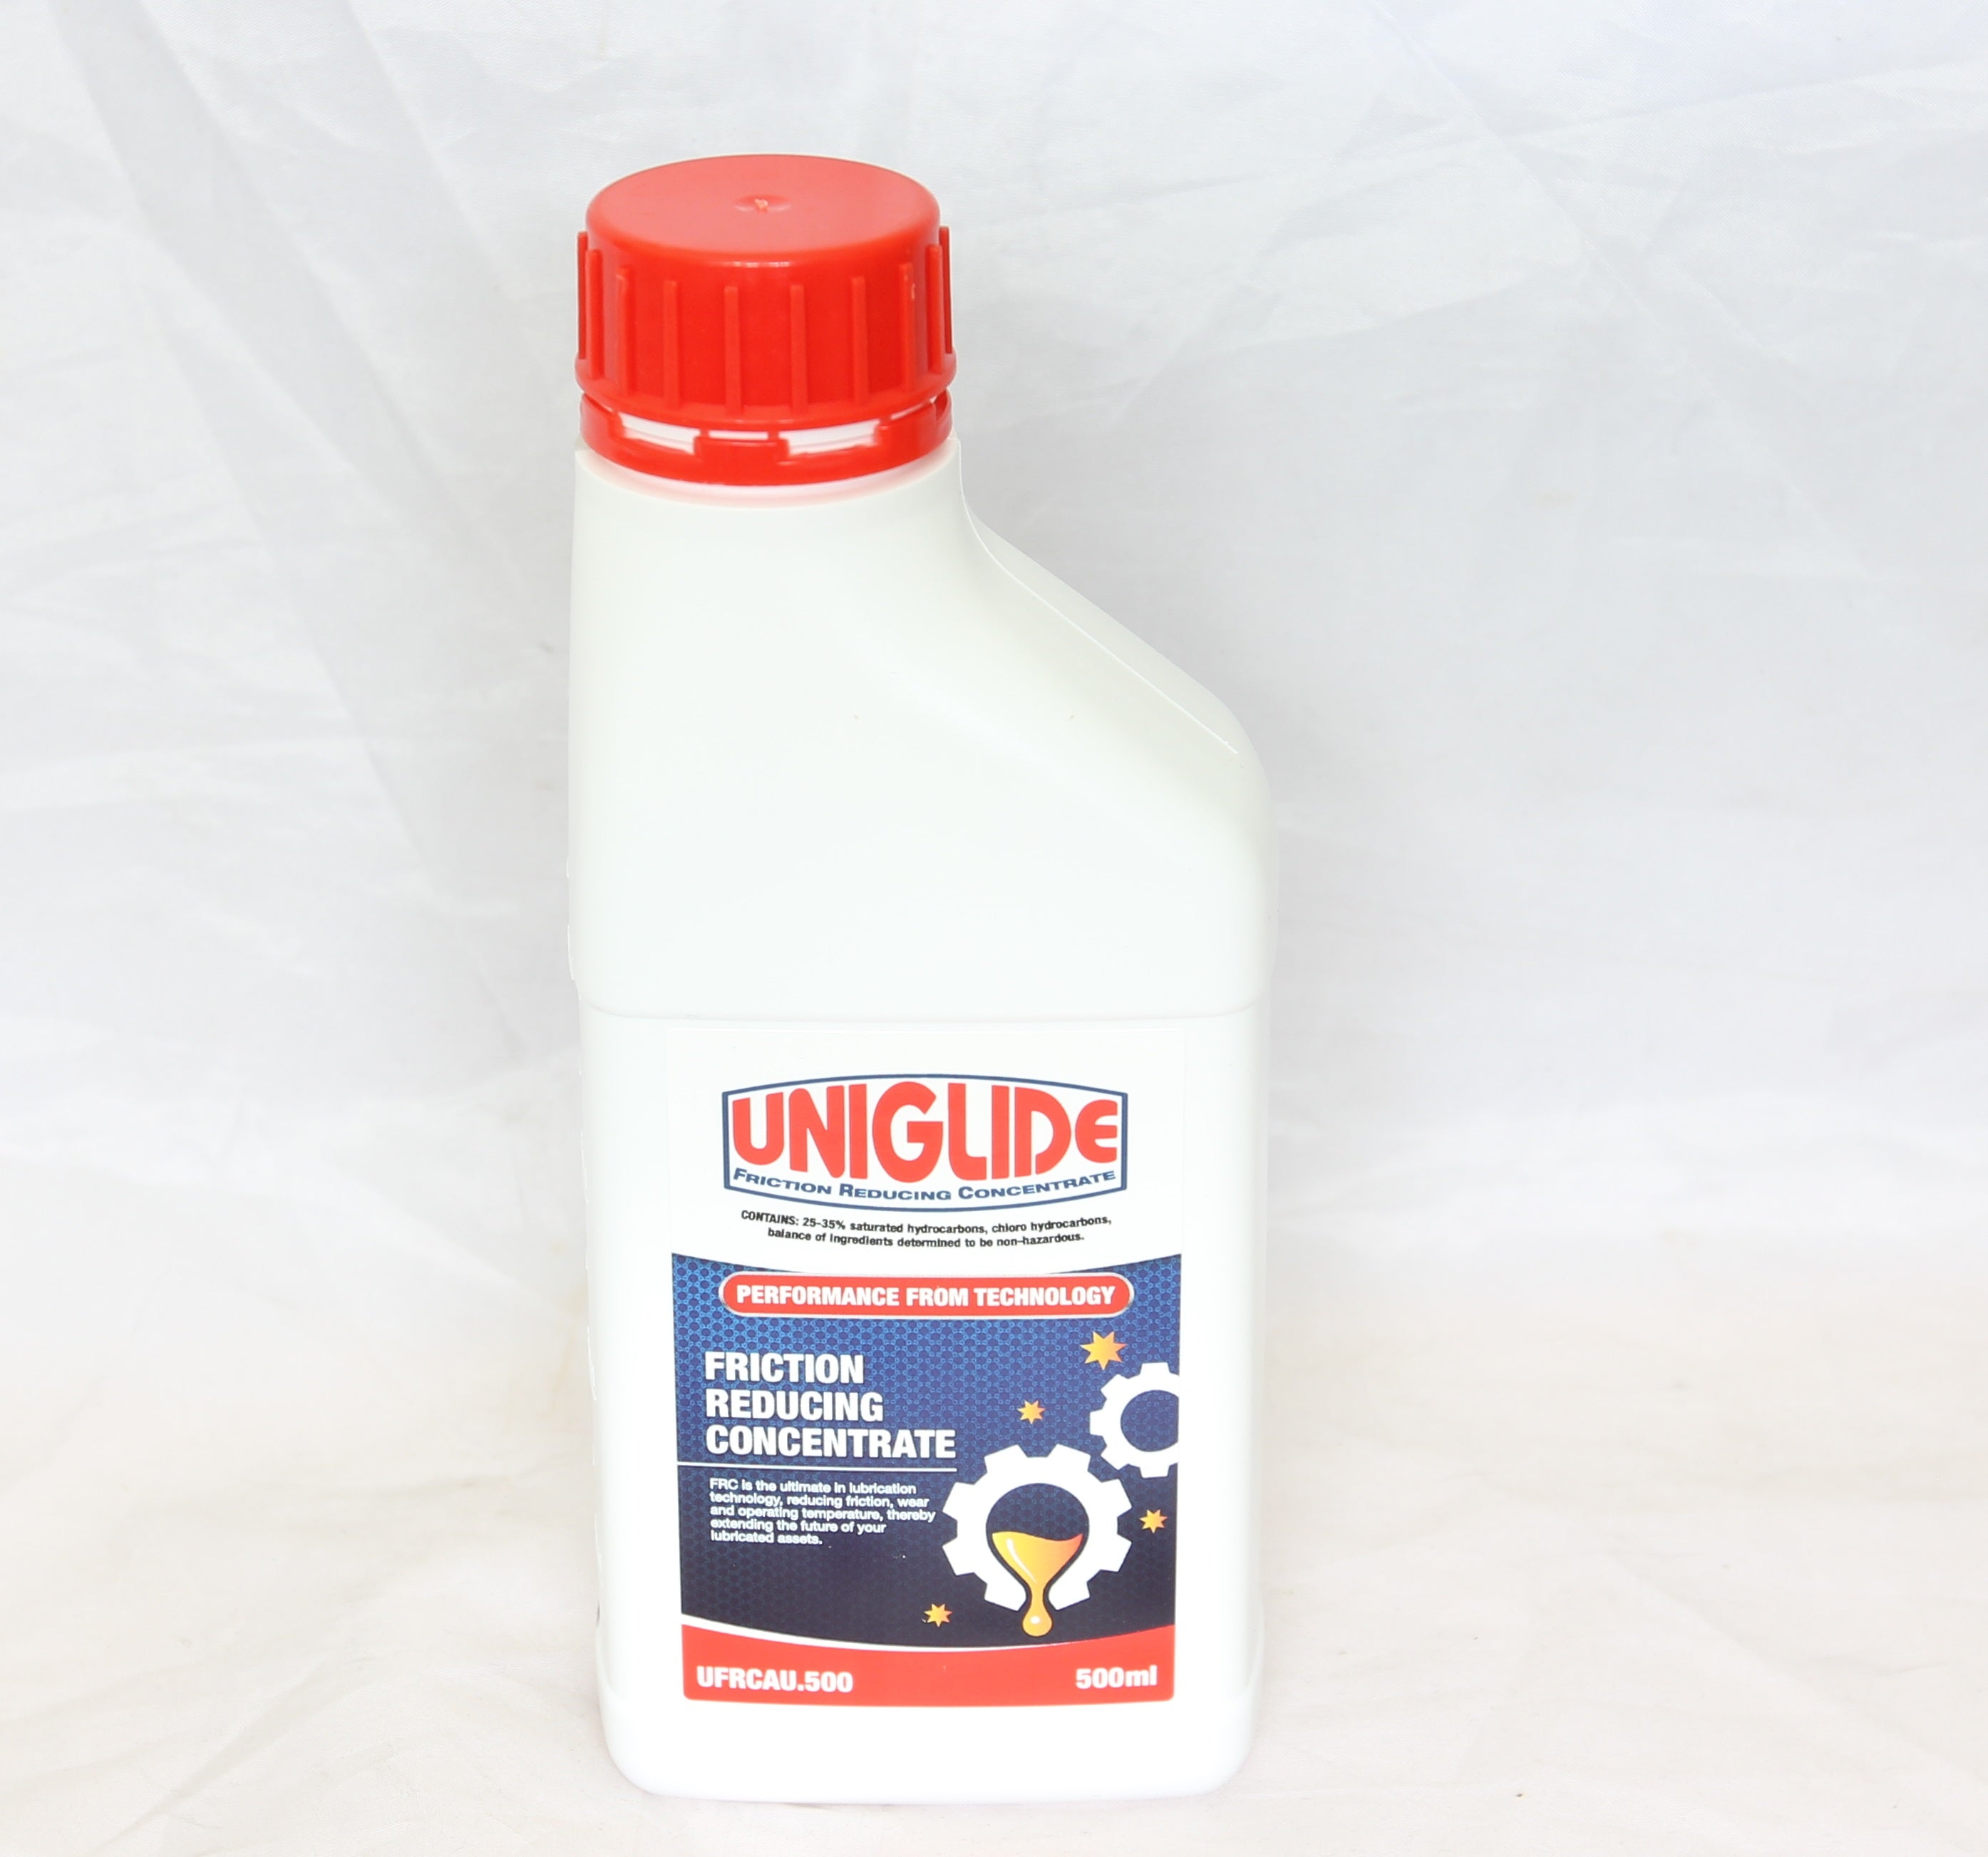 Uniglide Friction Reducing Concentrate - 500ml | Performance Lubricants Australia